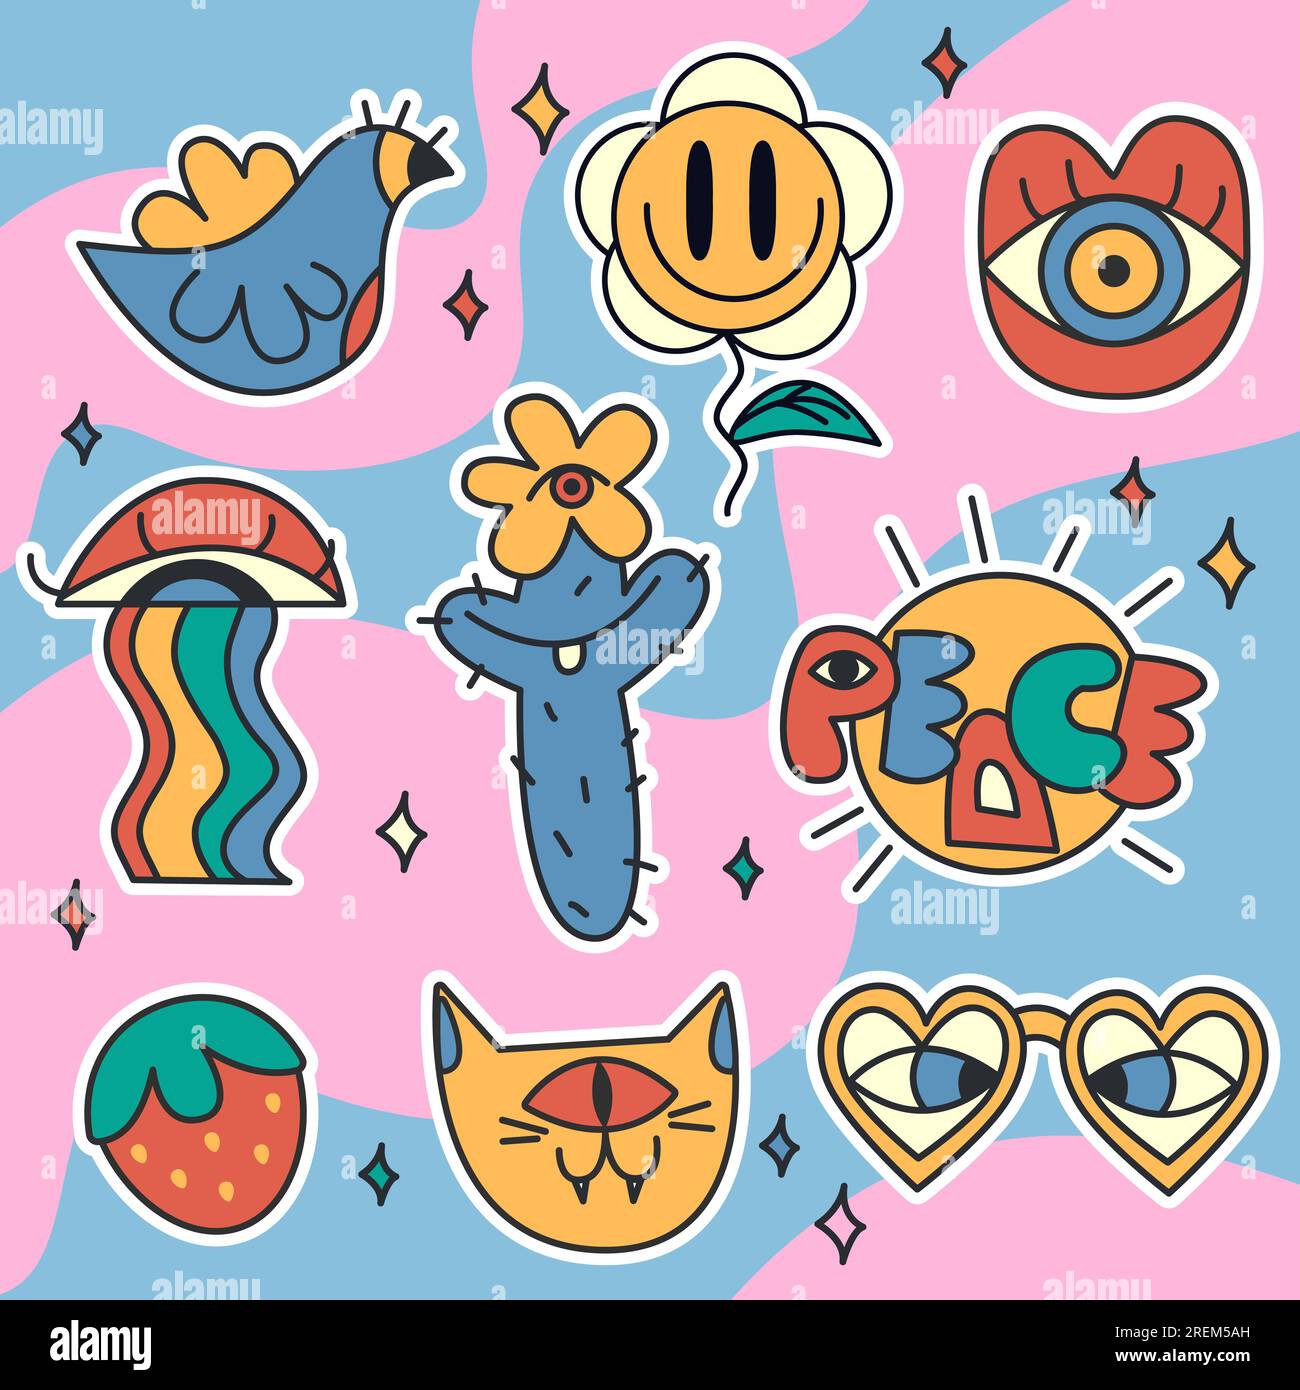 Peaceful stickers set in retro groovy style Stock Vector